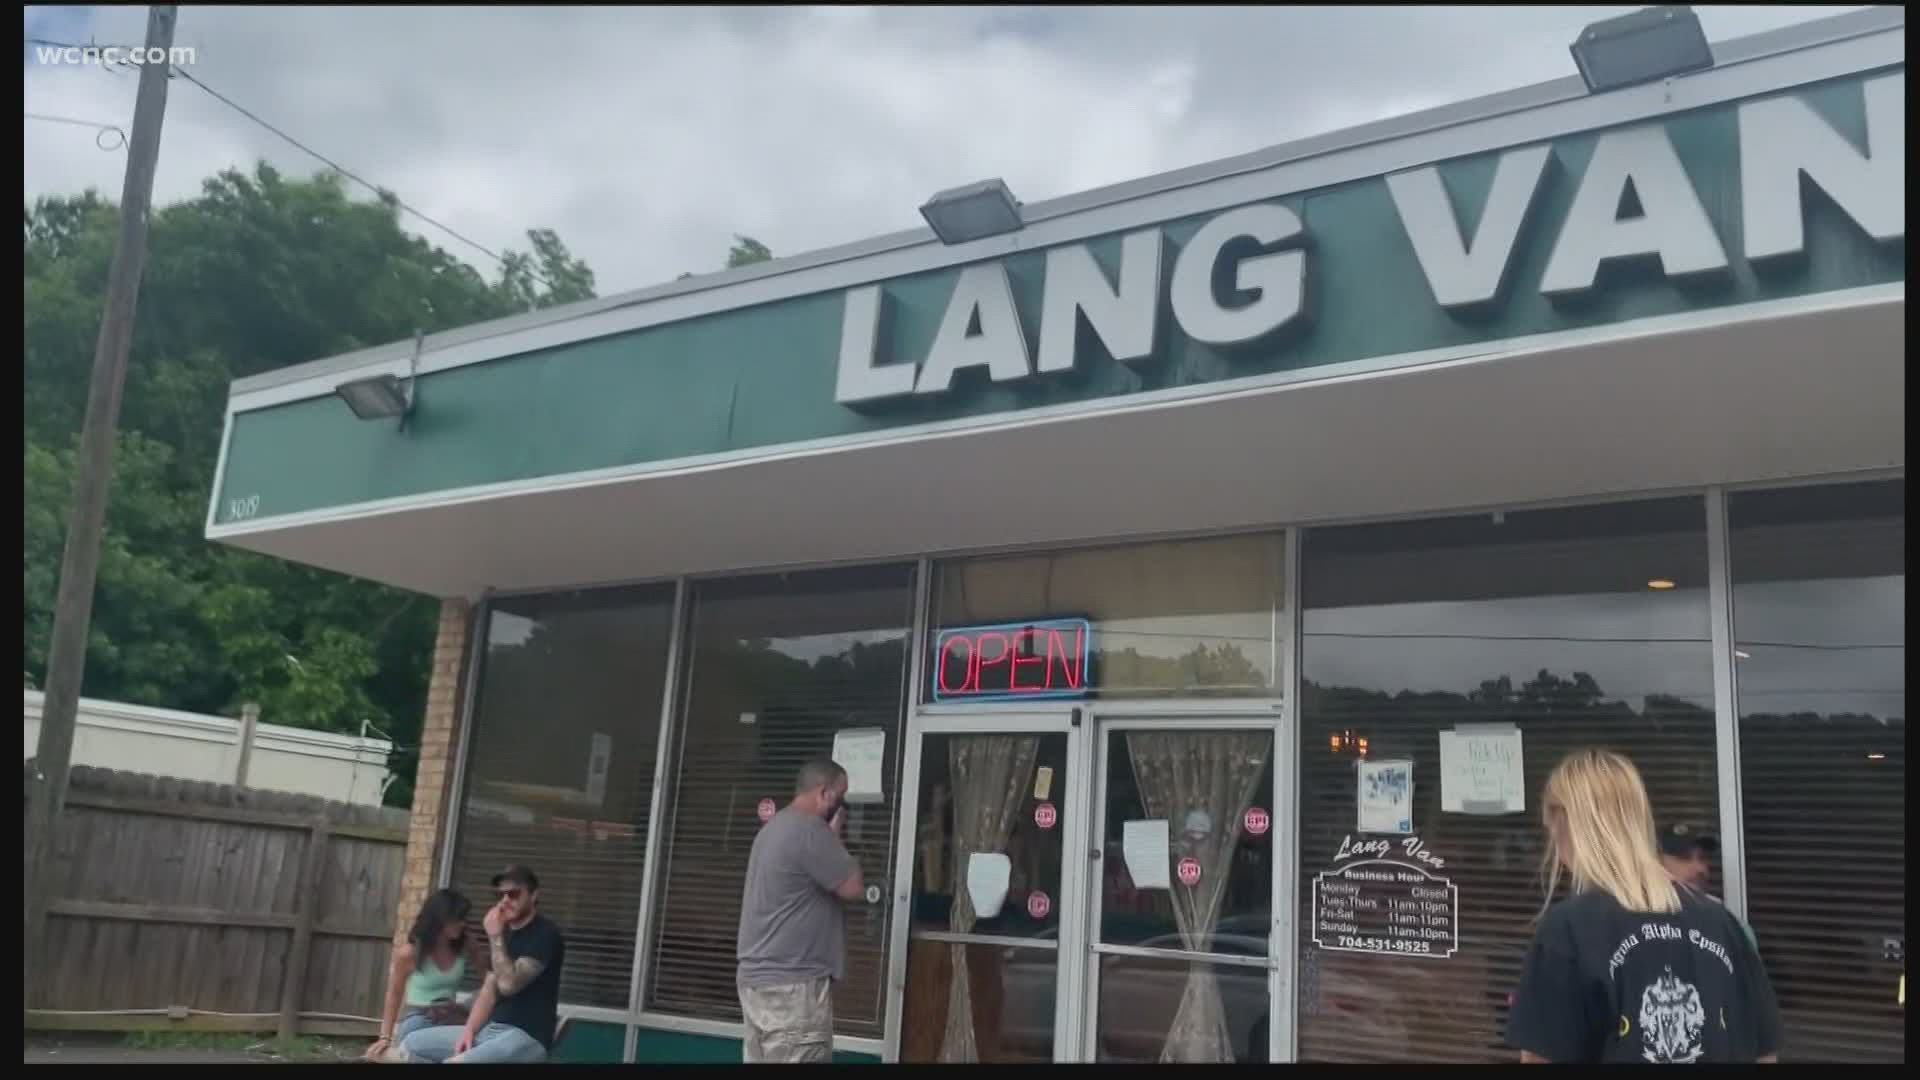 Lang Van was just named the best takeout spot in North Carolina by Move.org.